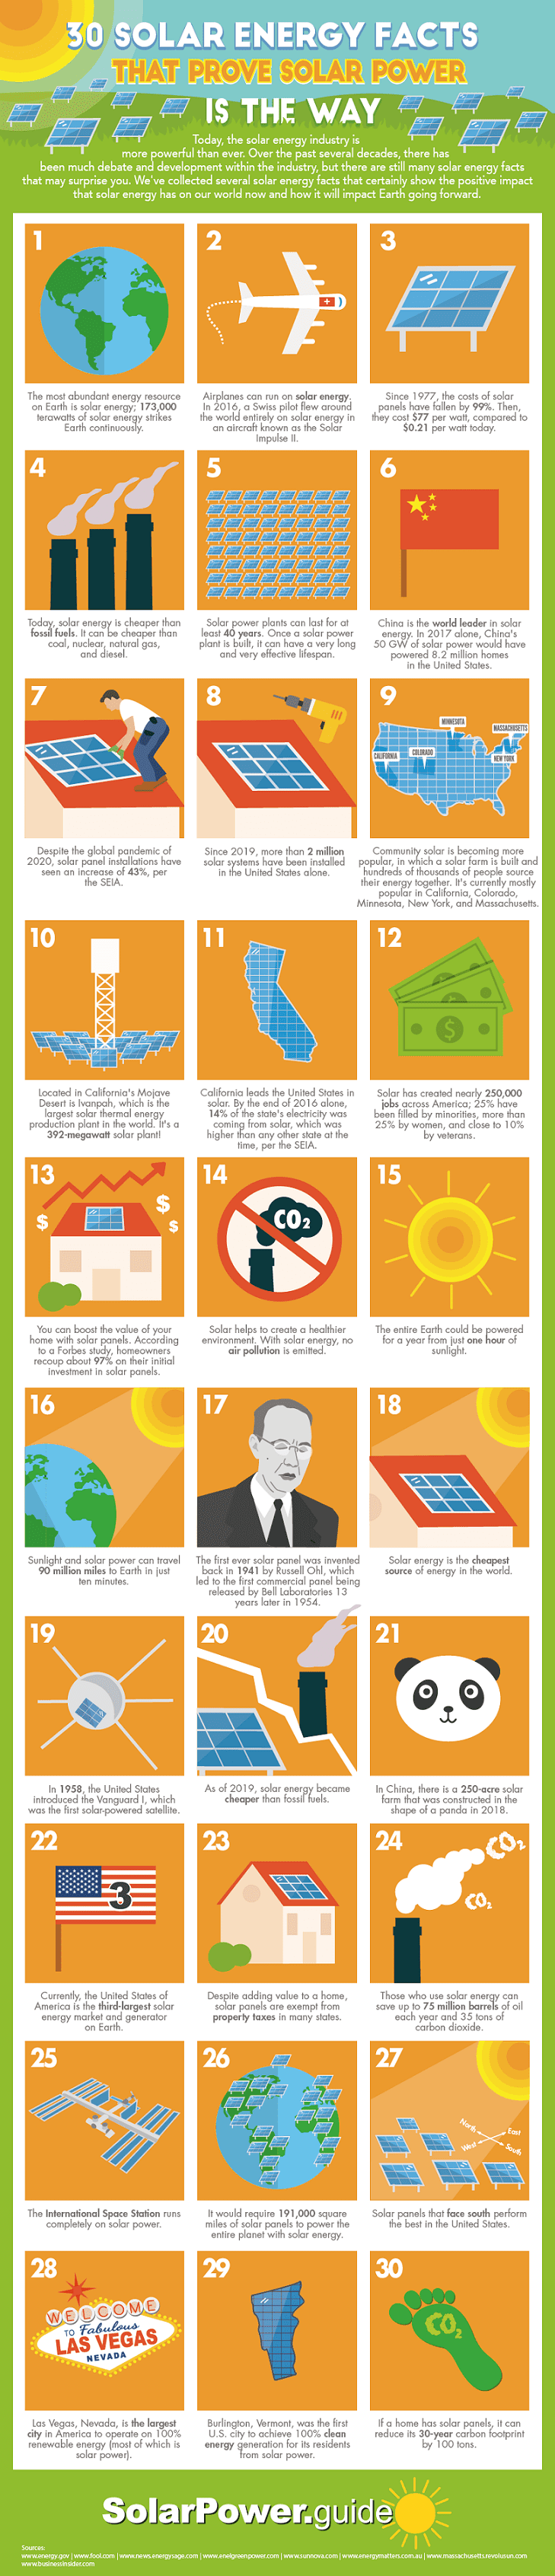 solar-energy-facts-Infographic